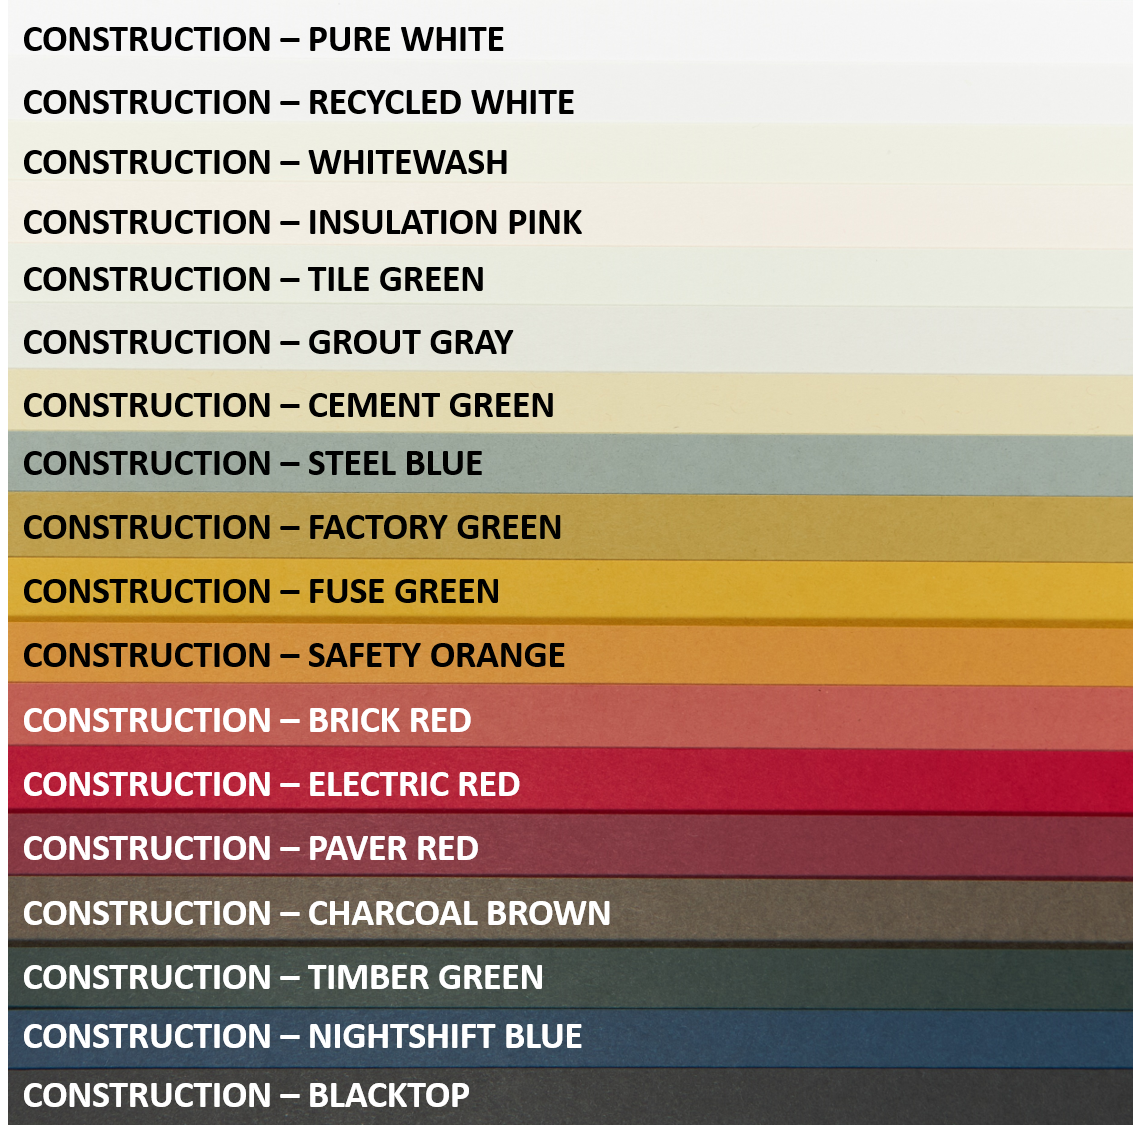 Whitewash Cardstock (Construction, Cover Weight)